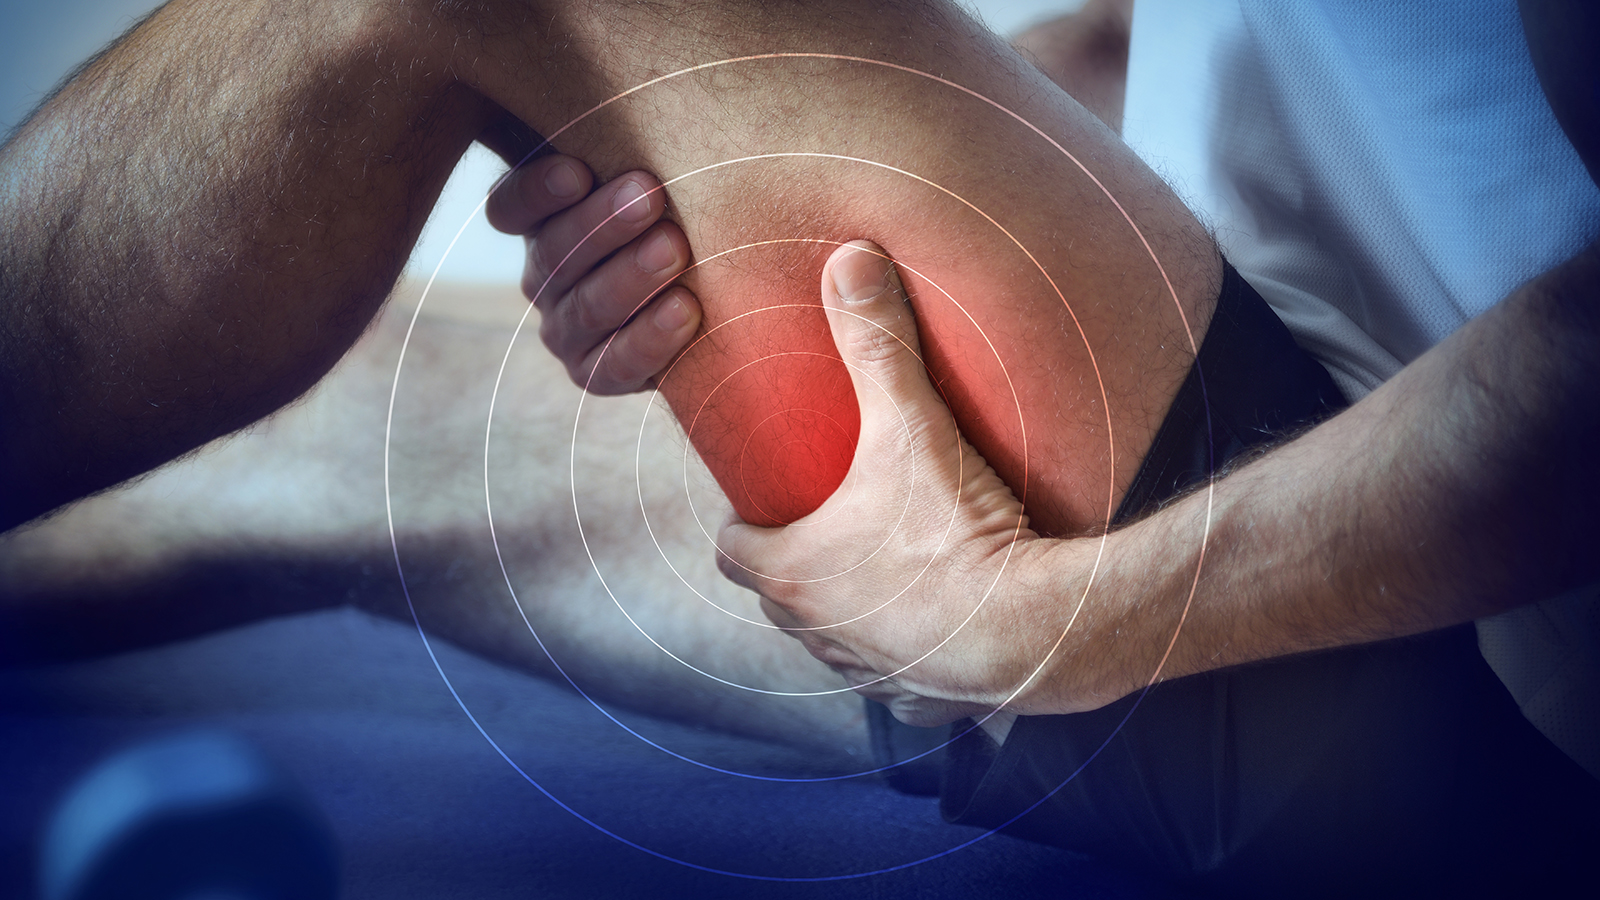 How to Treat a Pulled Hamstring